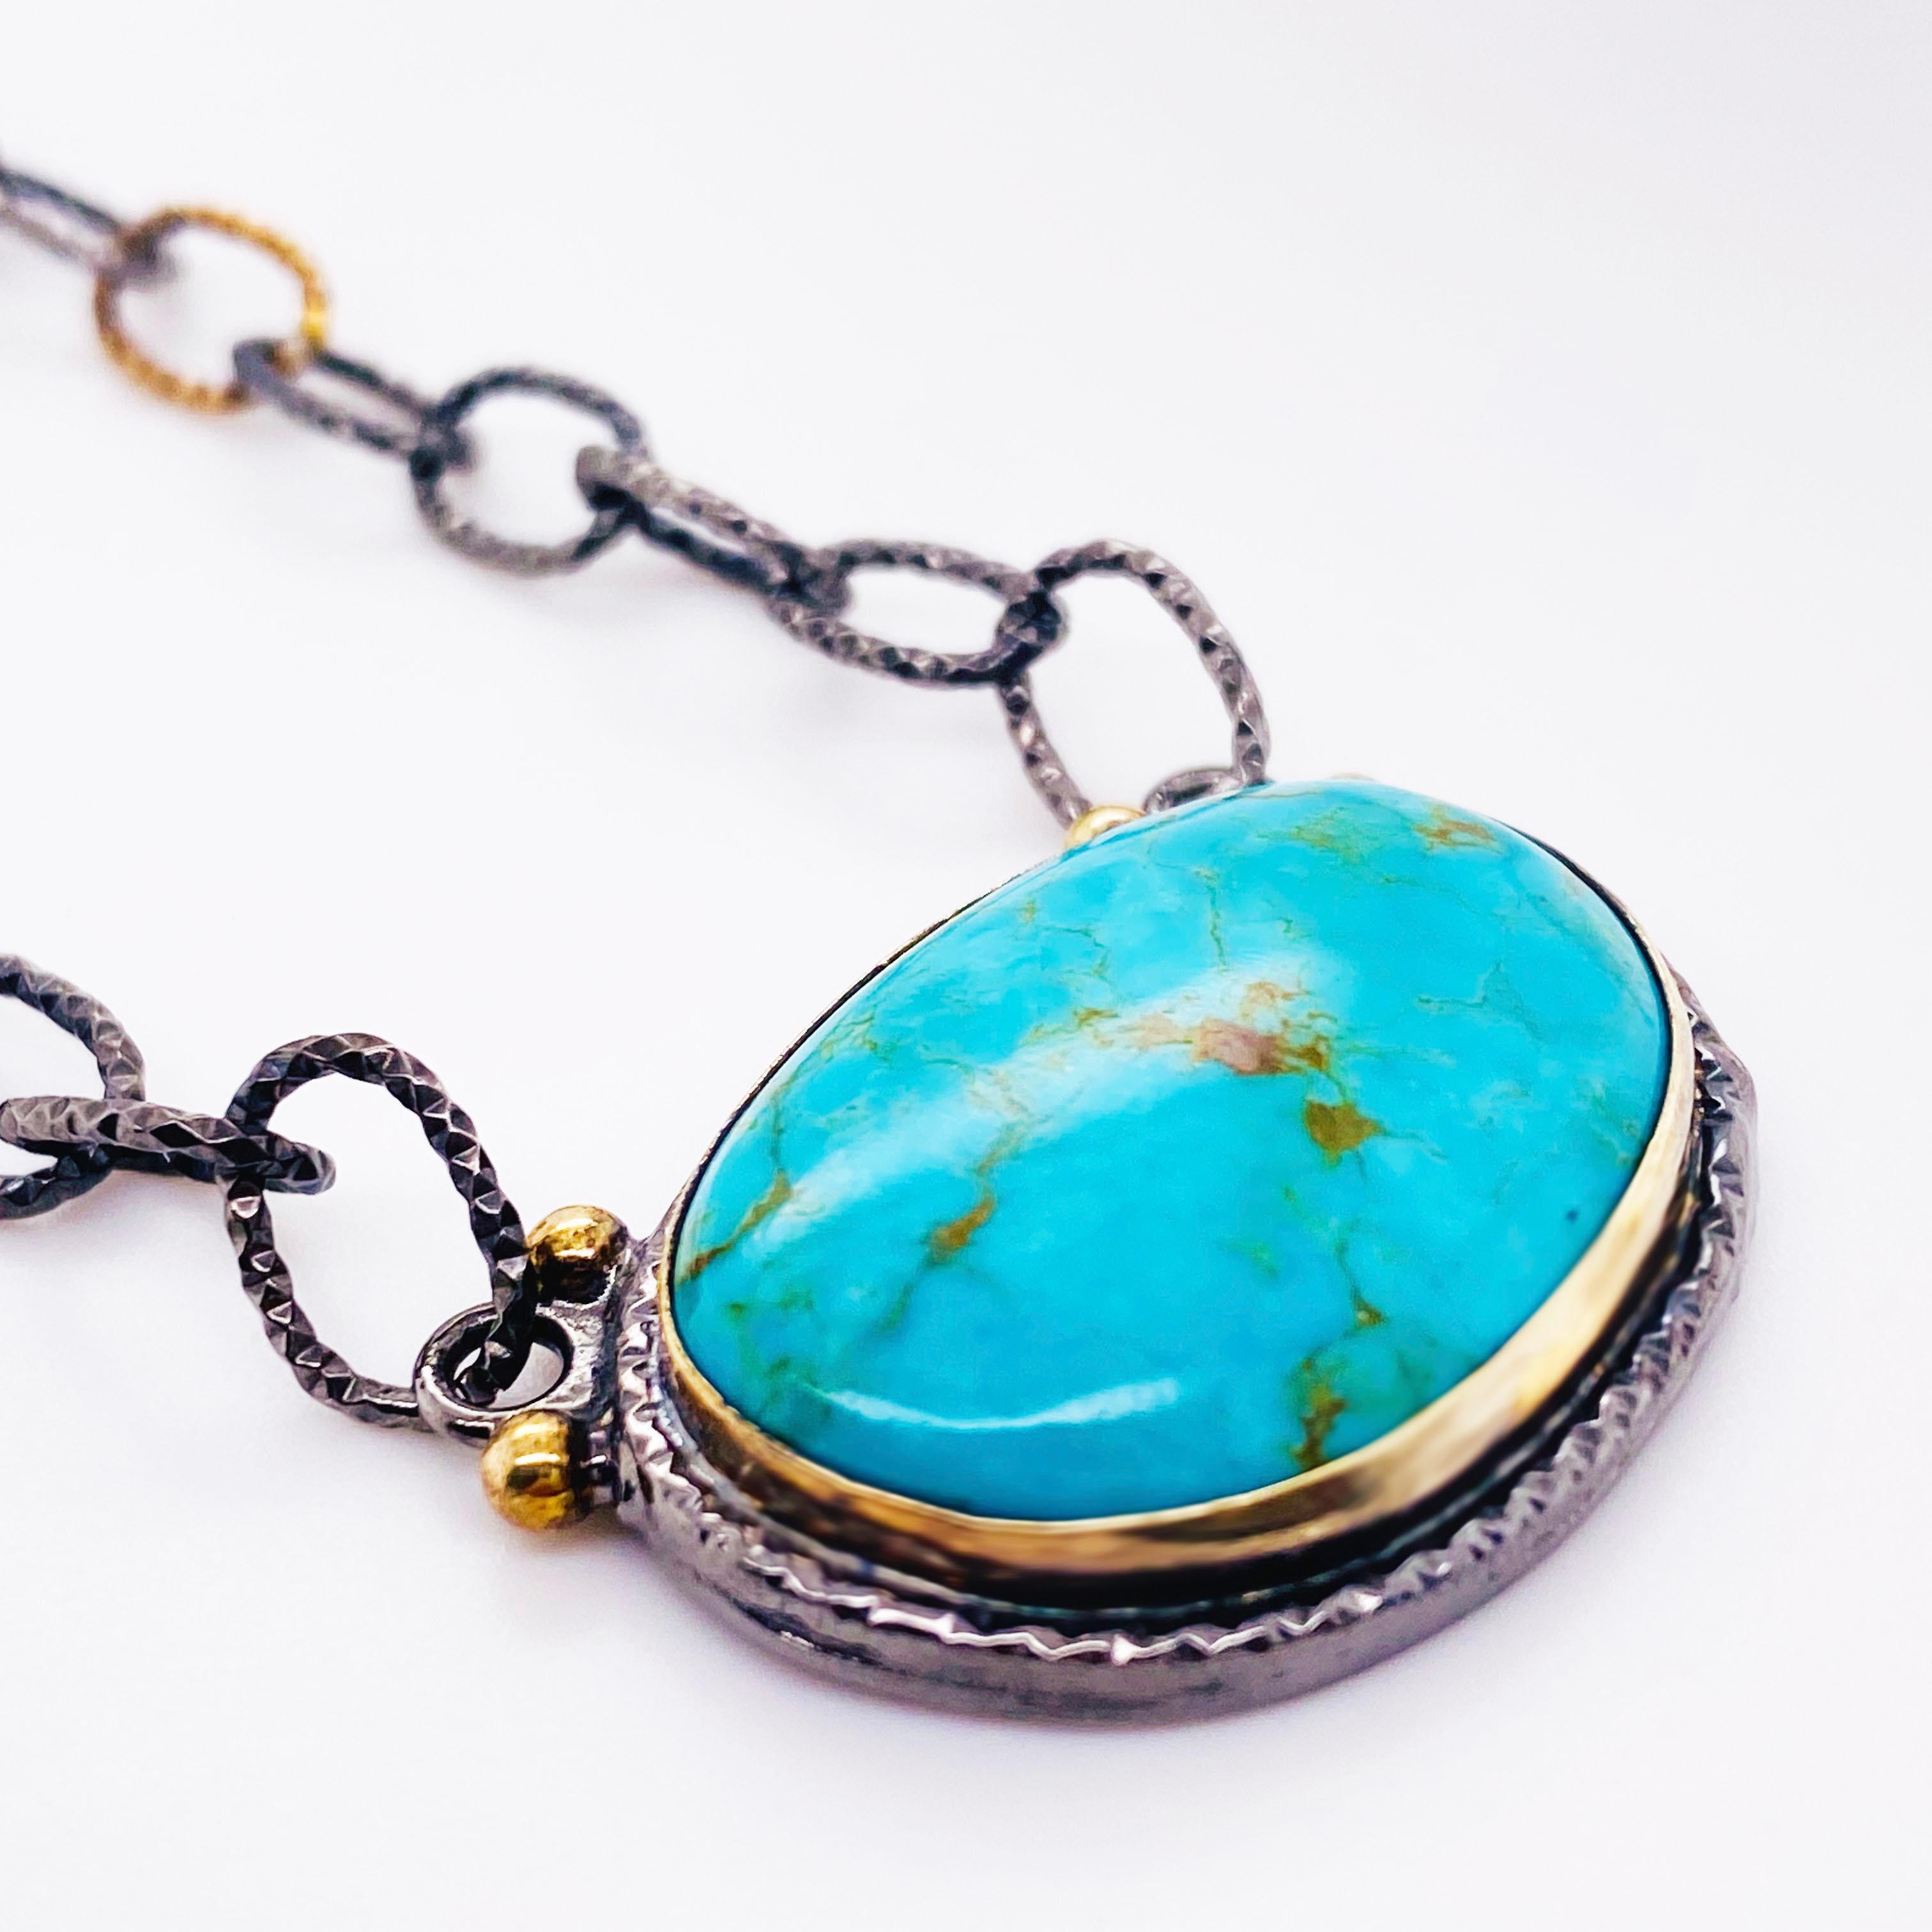 Cabochon Turquoise Statement Necklace in Sterling Silver Bezel and Handmade Chain